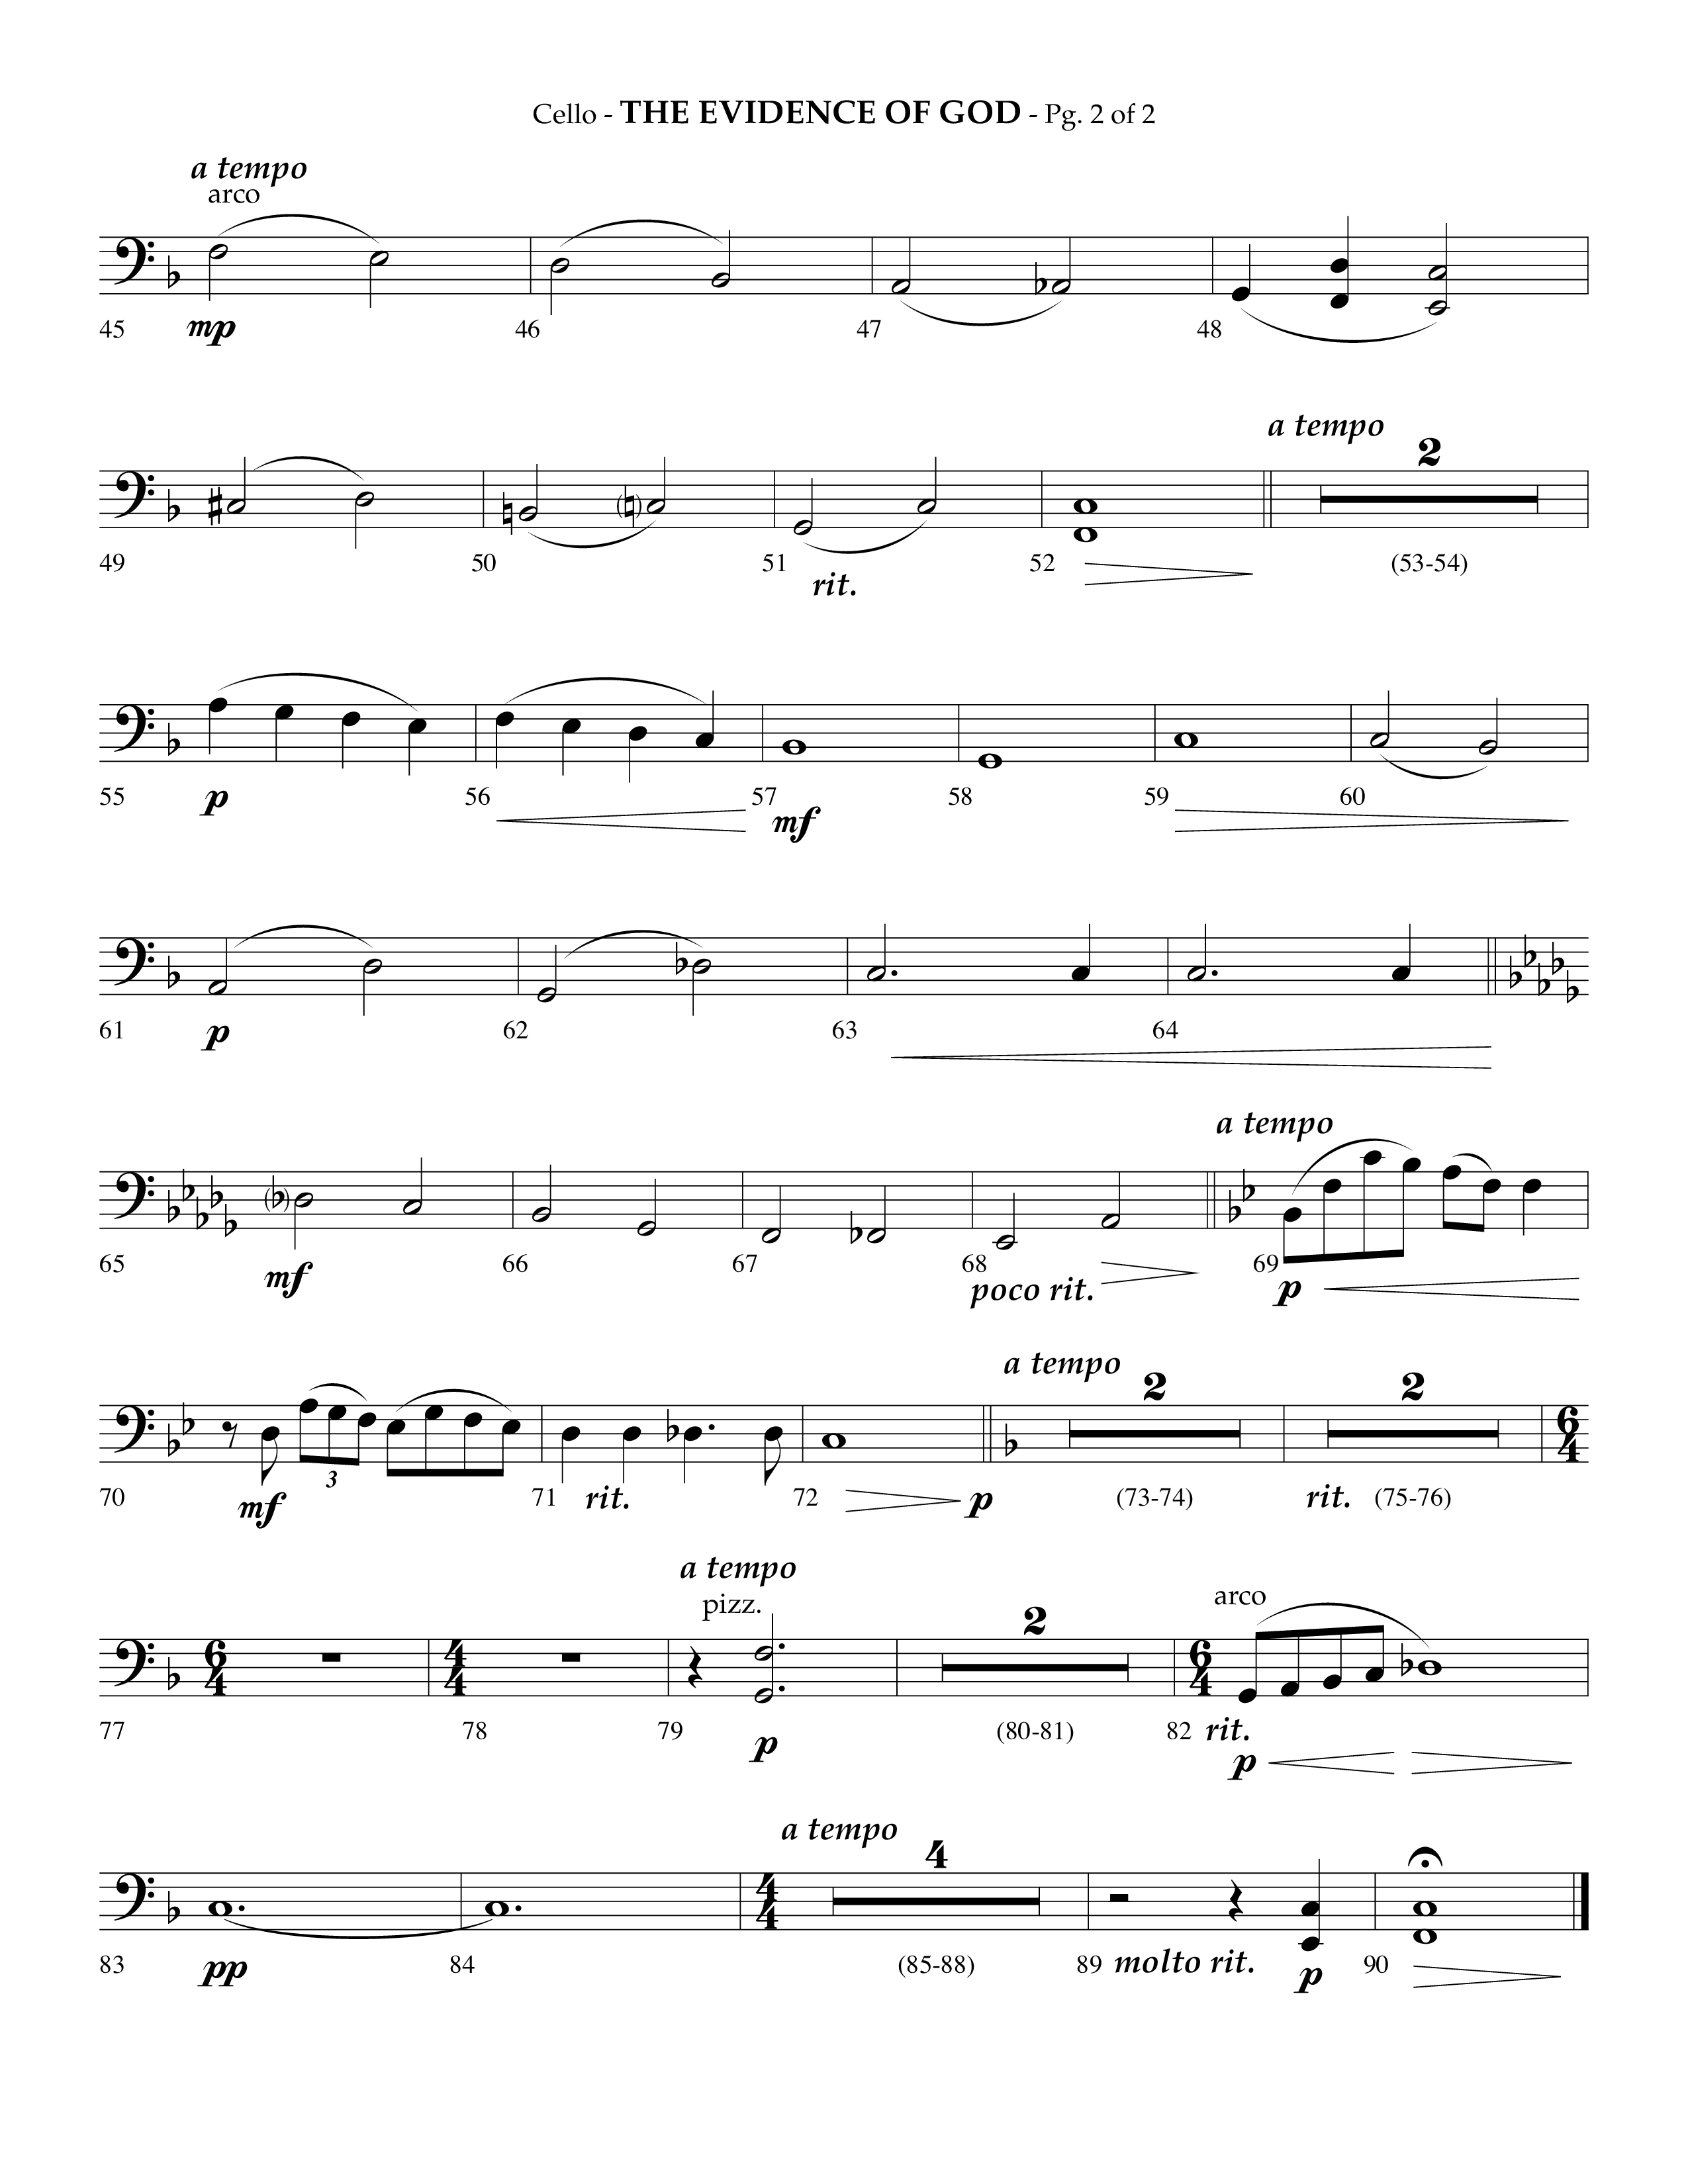 The Evidence Of God (Choral Anthem SATB) Cello (Lifeway Choral / Arr. Phillip Keveren)